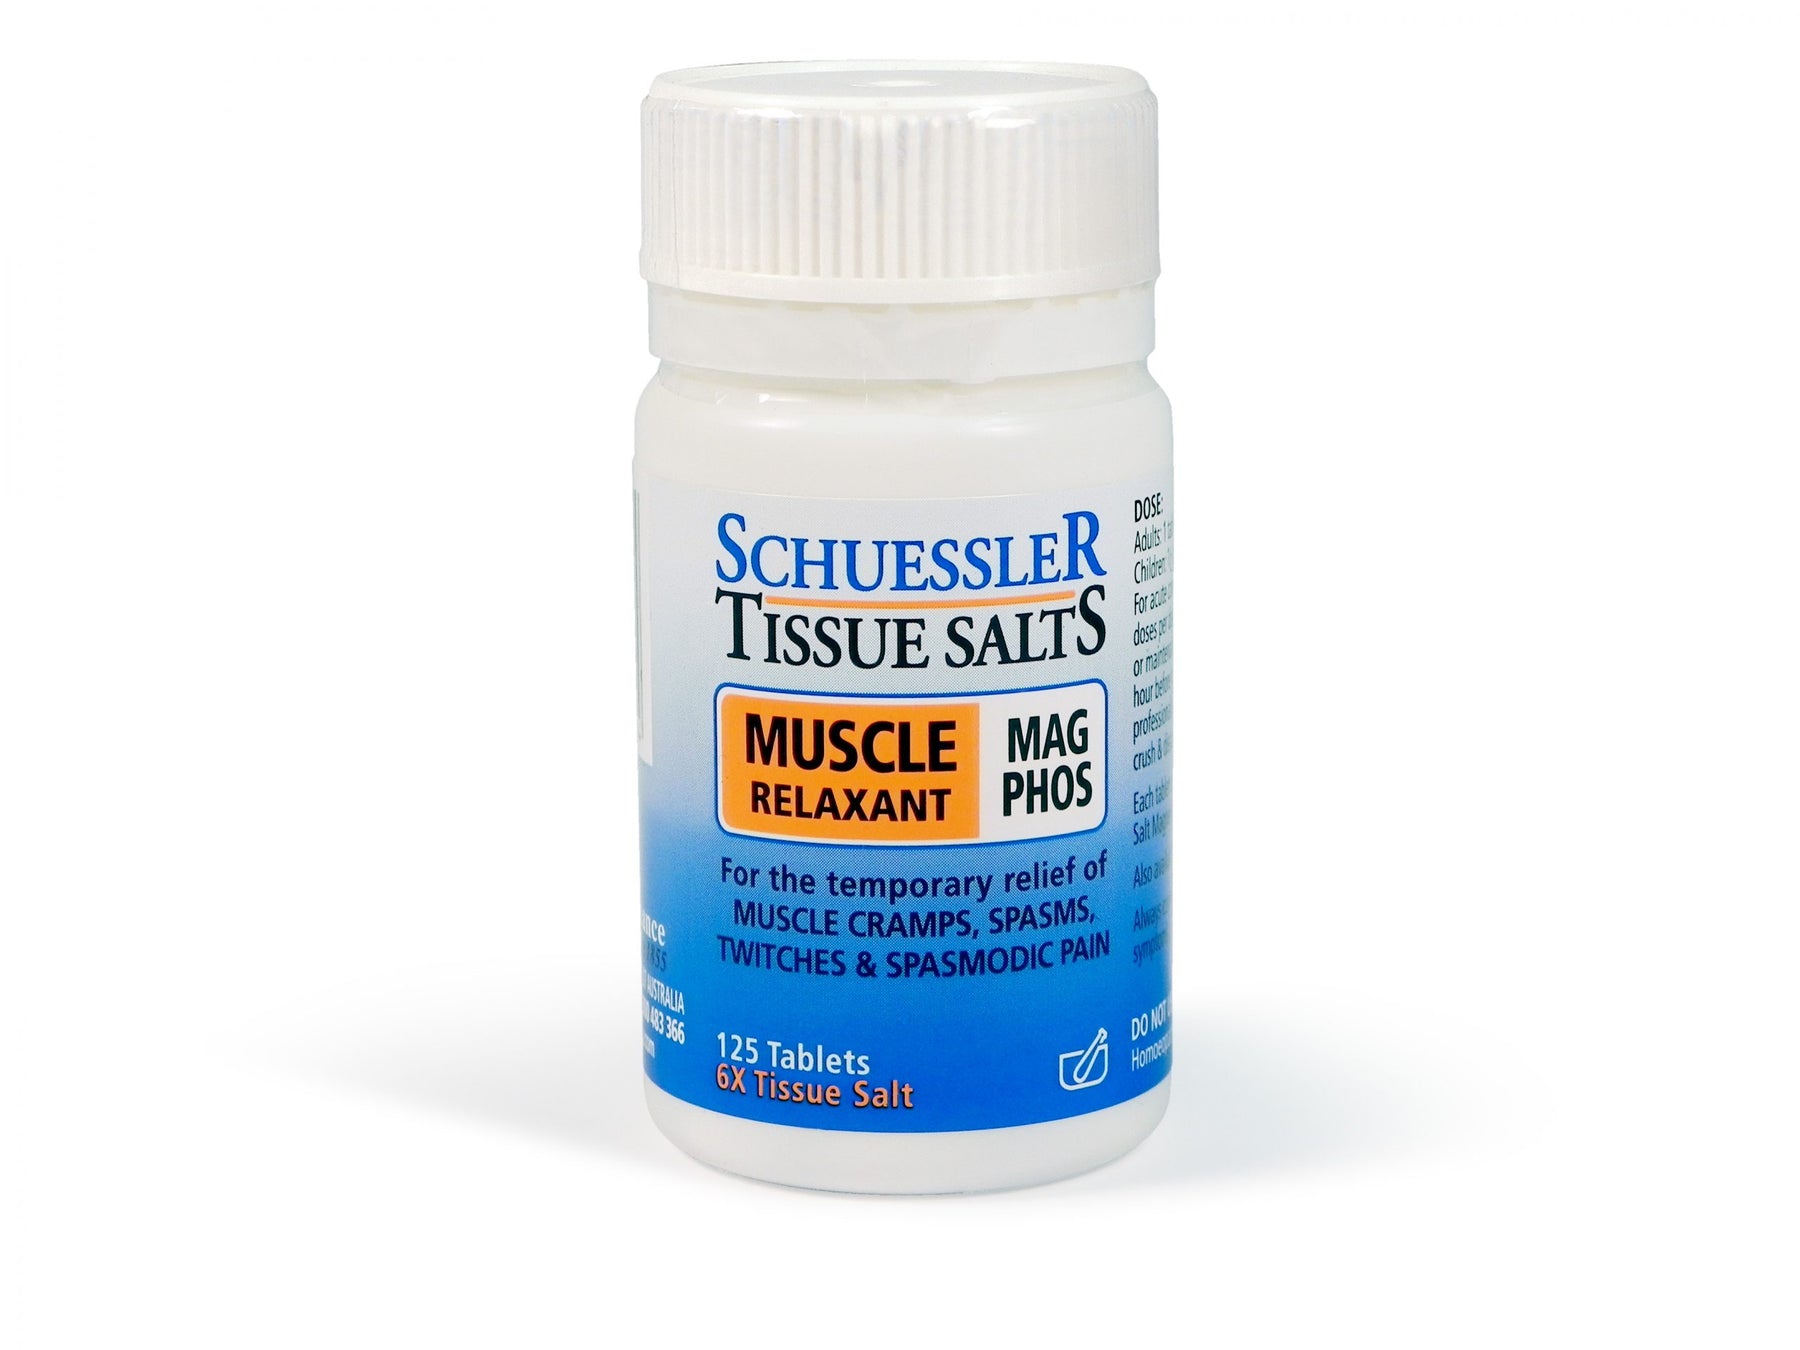 Schuessler Tissue Salts Muscle Relaxant Mag Phos 8